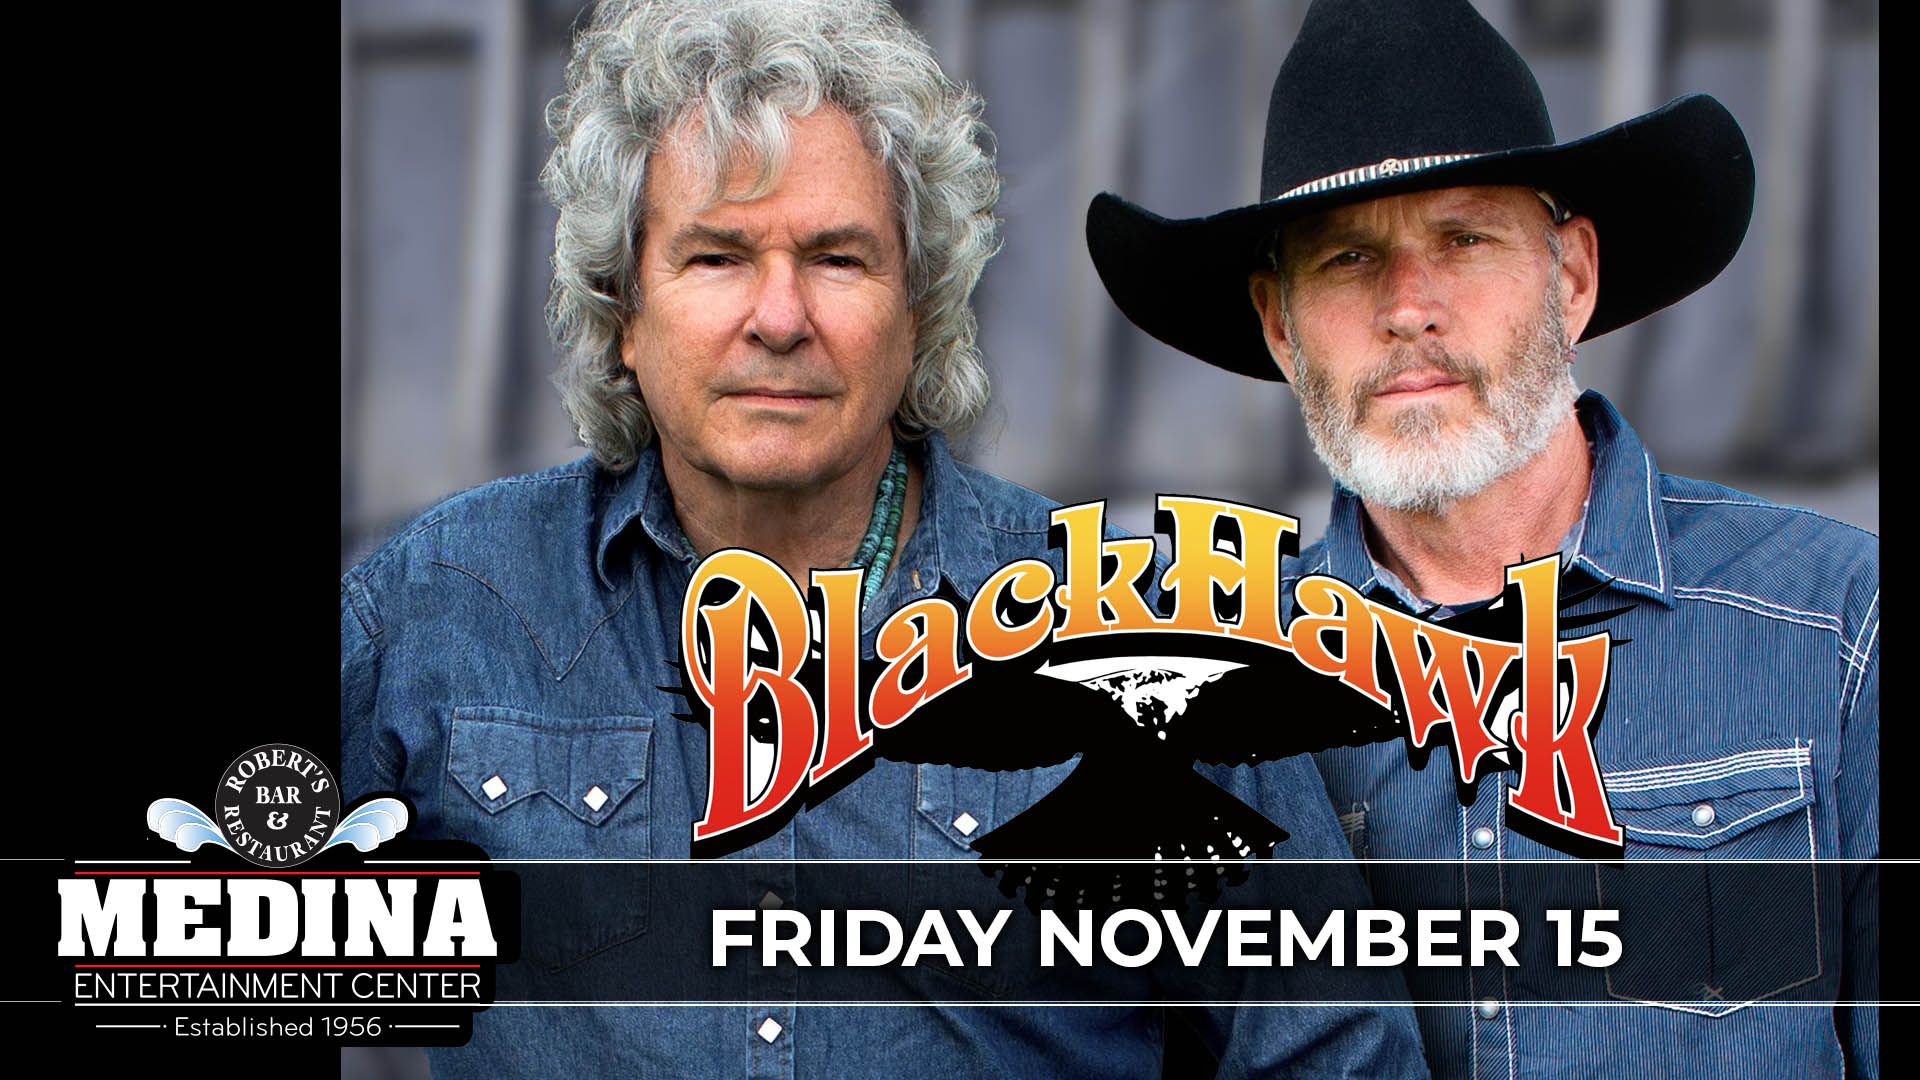 BlackHawk with guest Jake Nelson Band Friday, November 15 Medina Entertainment Center Doors: 7:00PM | Music: 8:00PM | 21+ Gold Reserved $55 / Silver Reserved $49 / General Seating $38 (plus applicable fees) - Tickets are $8 more the day of show (plus applicable fees) - All Concerts are 21+ (No Exceptions) - Must Present A Valid ID - Tickets Are Non-refundable